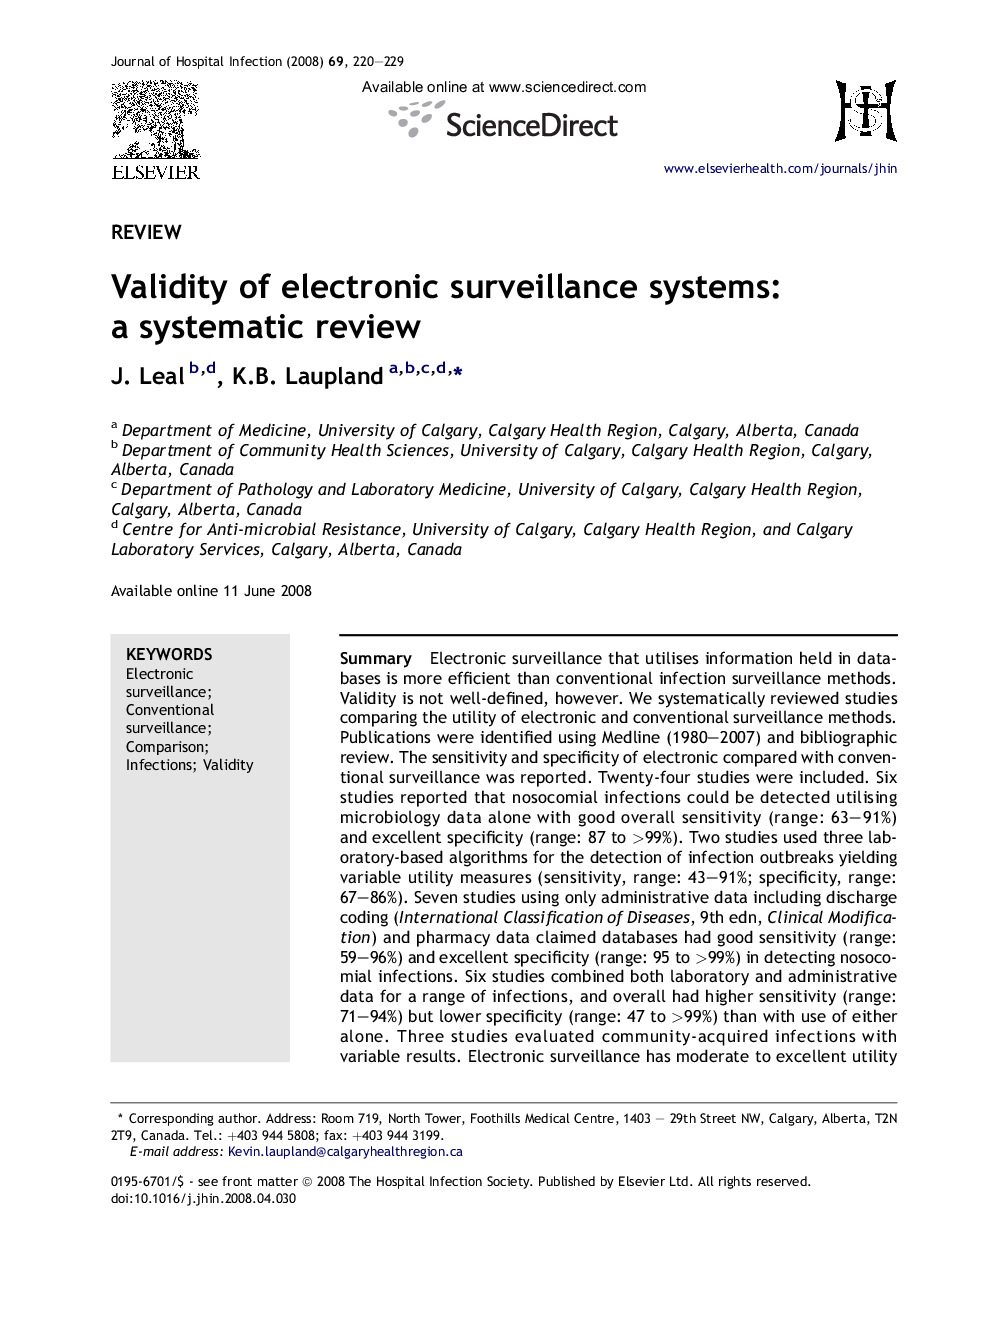 Validity of electronic surveillance systems: a systematic review